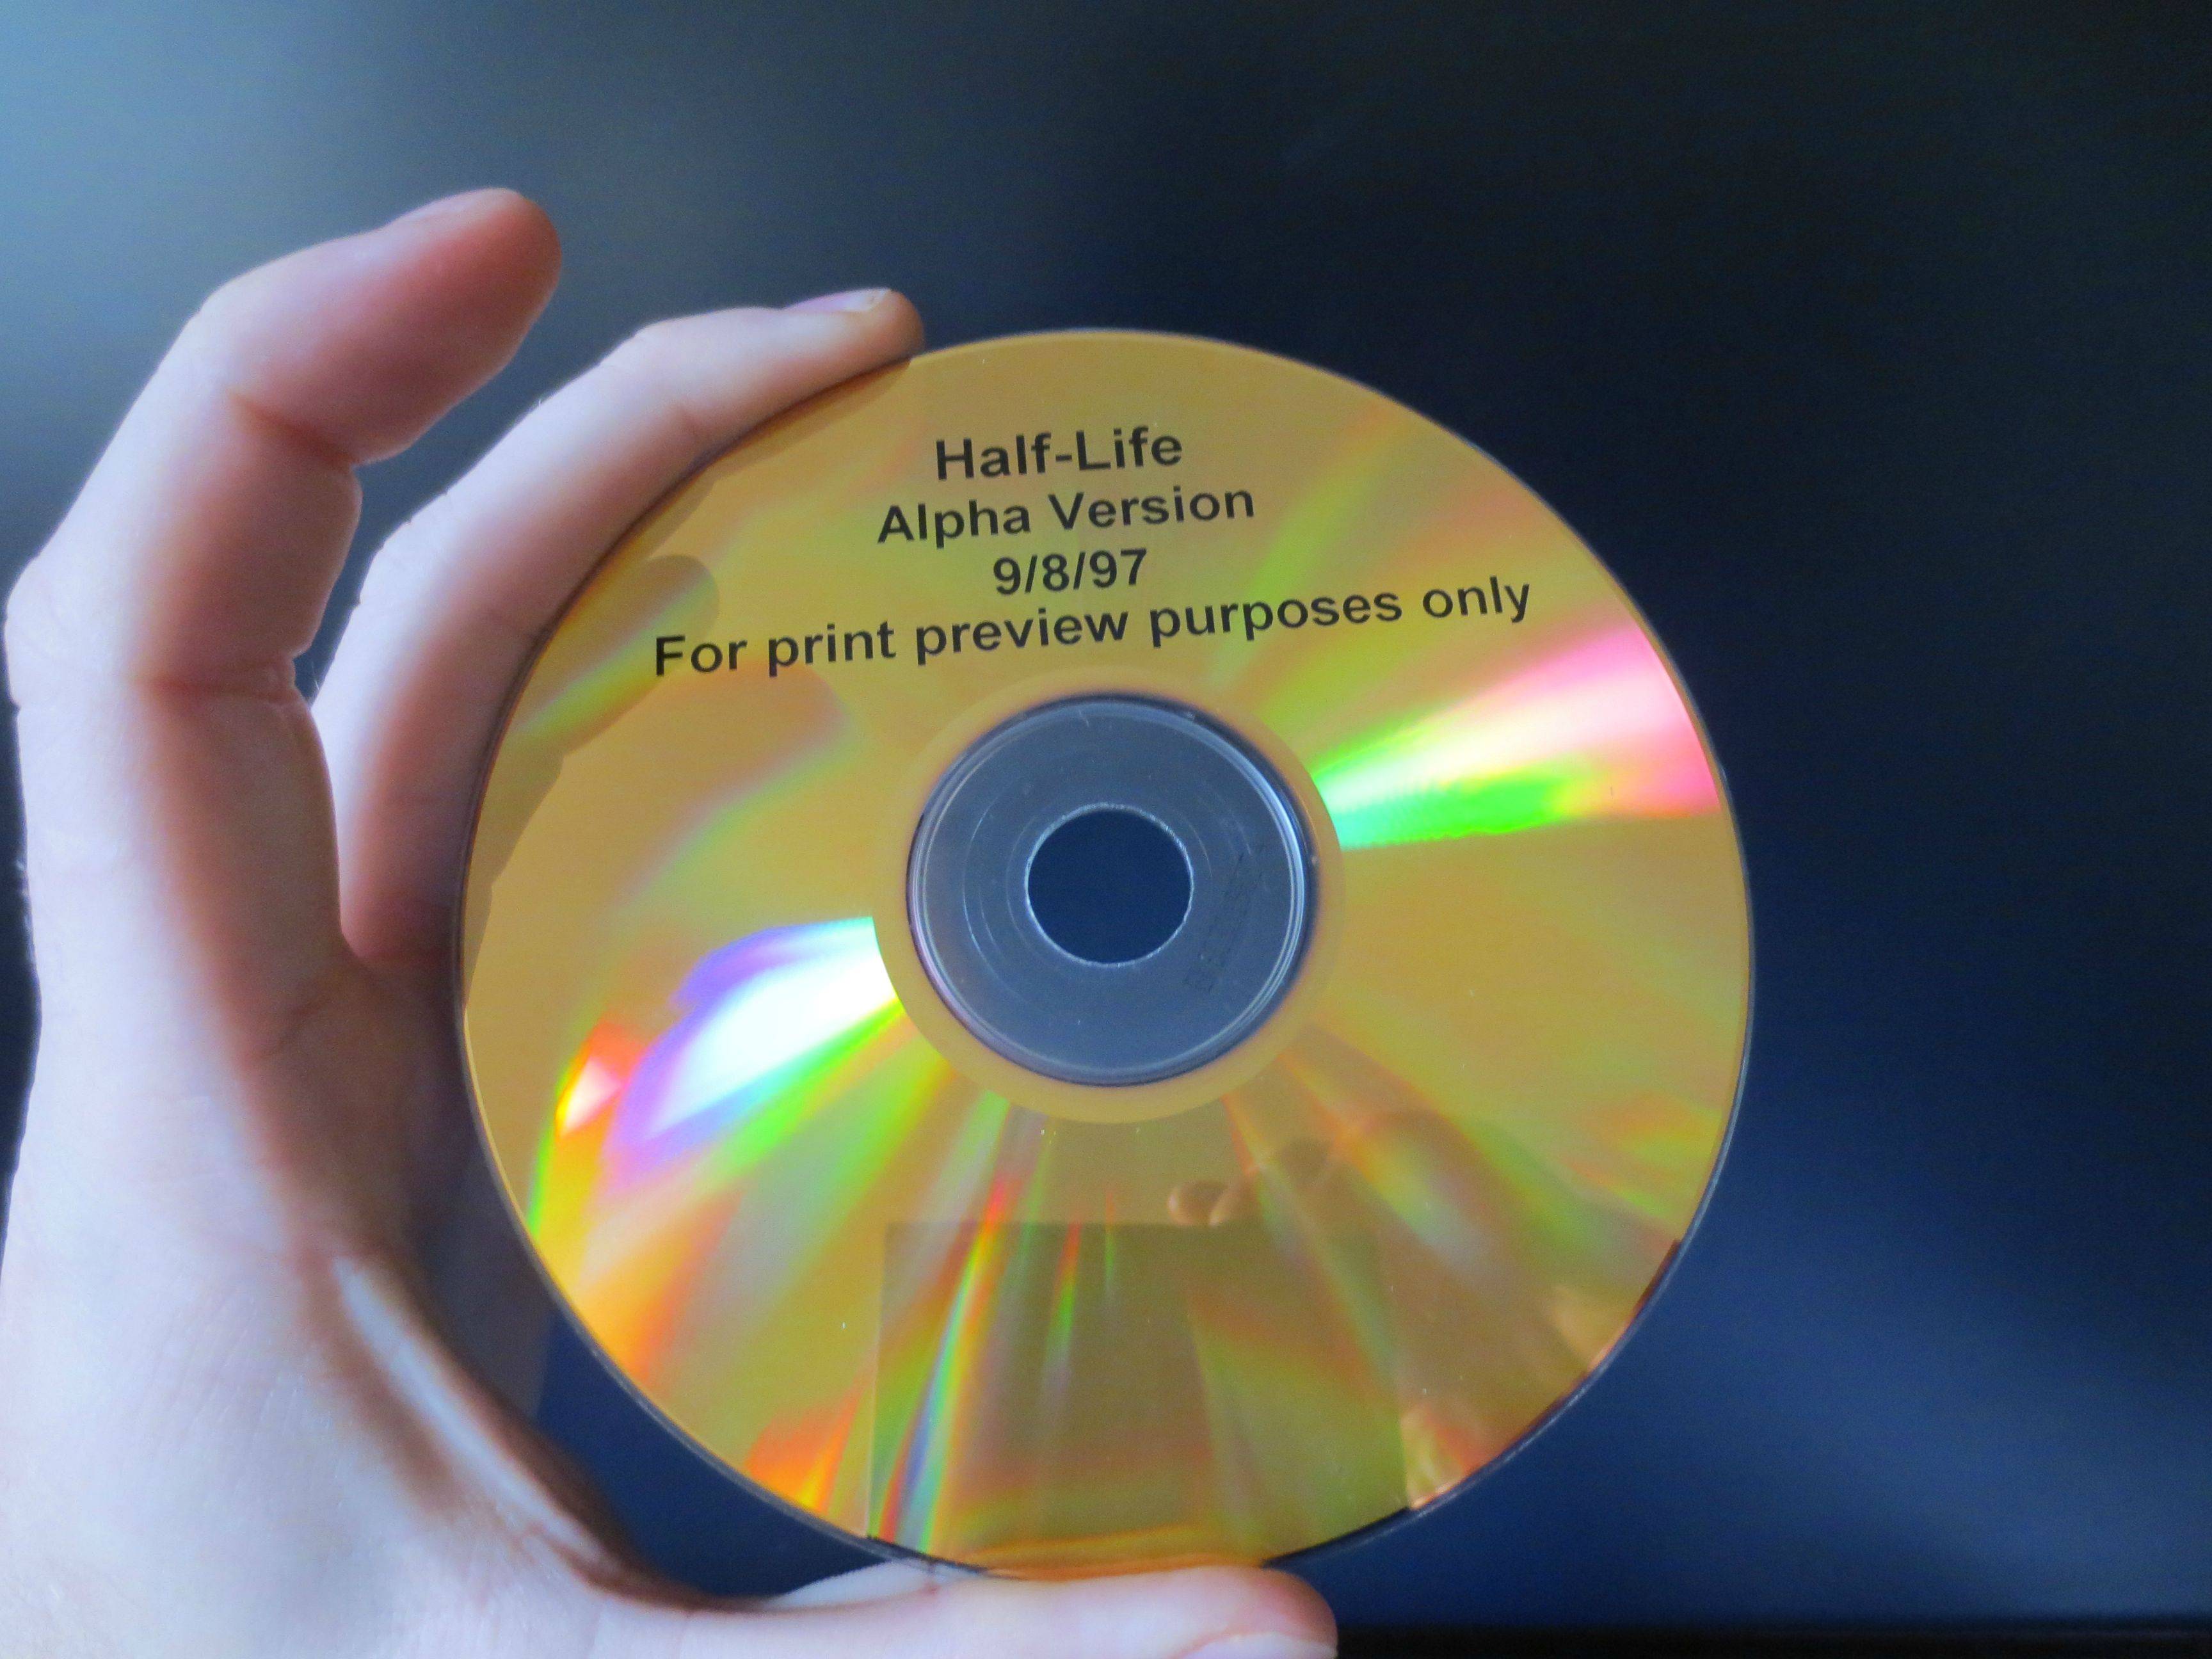 Type the cd key displayed on the half life cd case фото 36